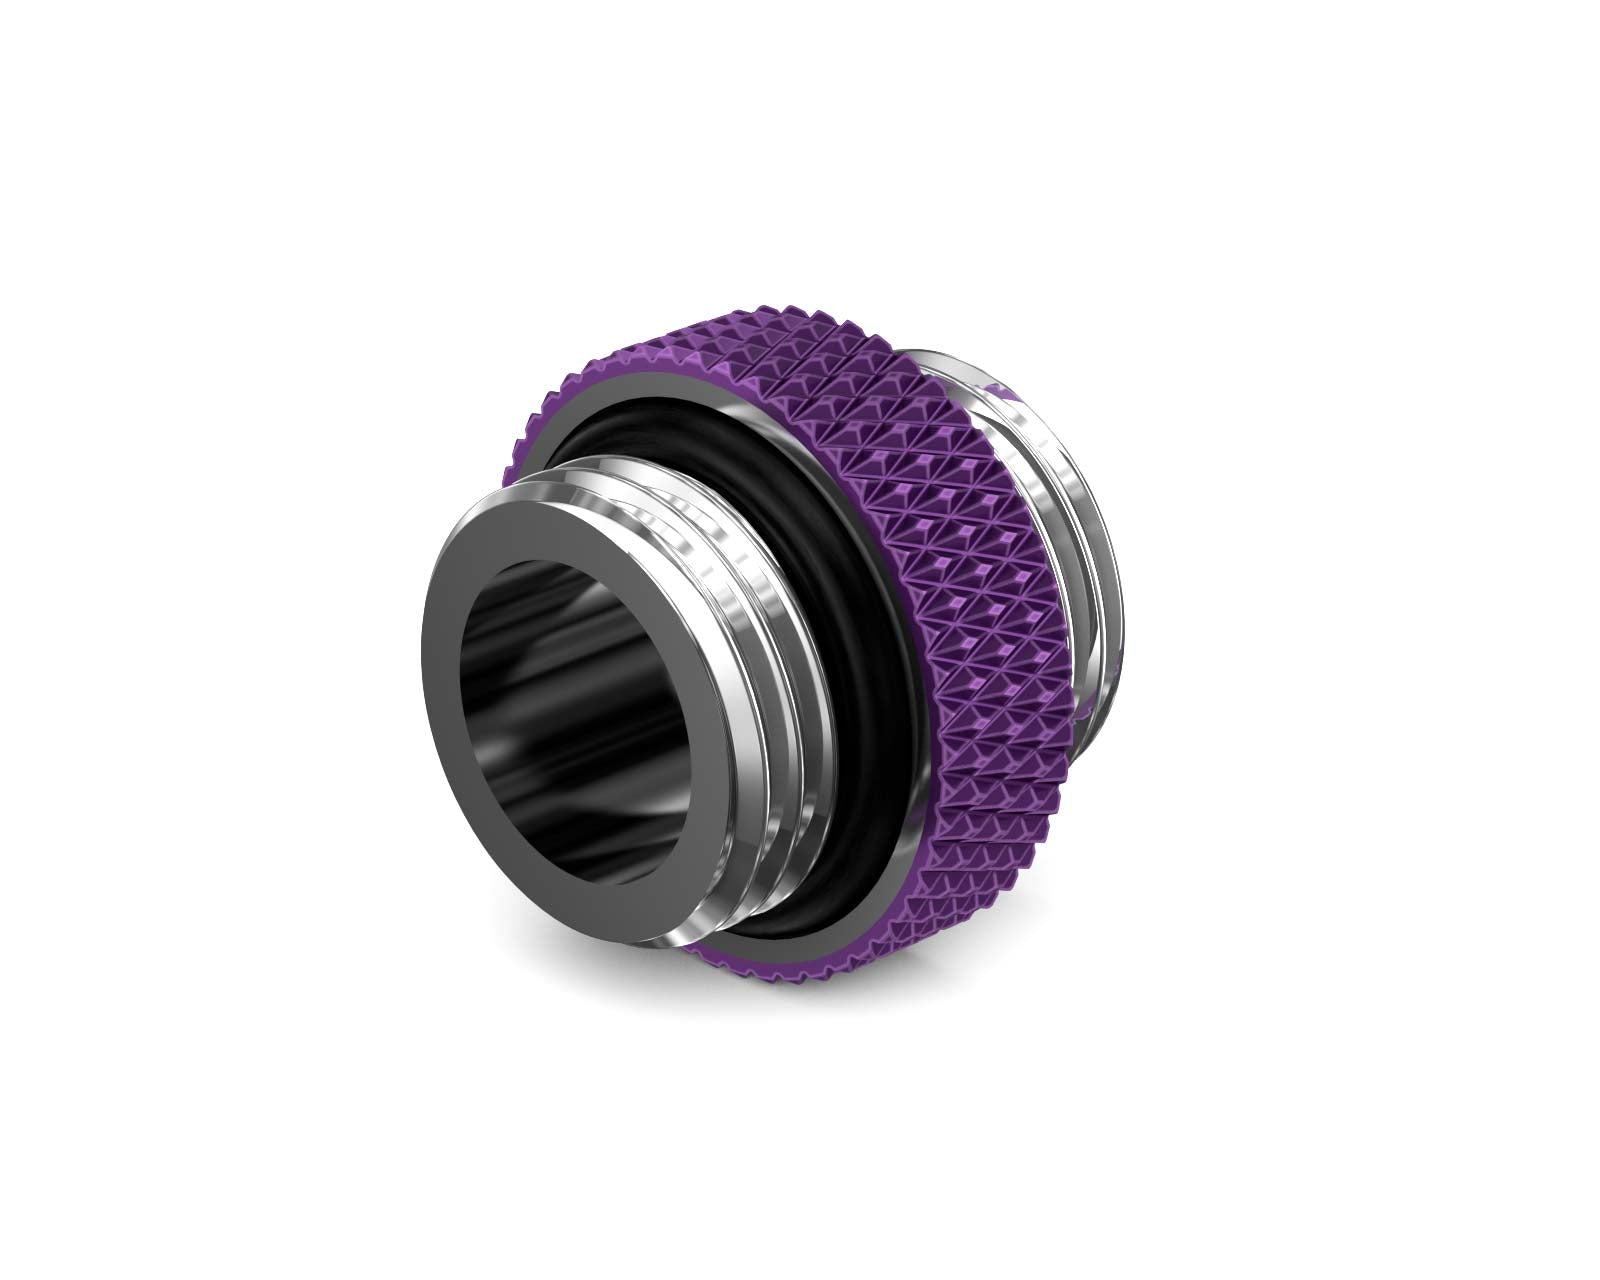 PrimoChill Dual Male G 1/4in. SX Mini Extension Coupler - PrimoChill - KEEPING IT COOL Candy Purple